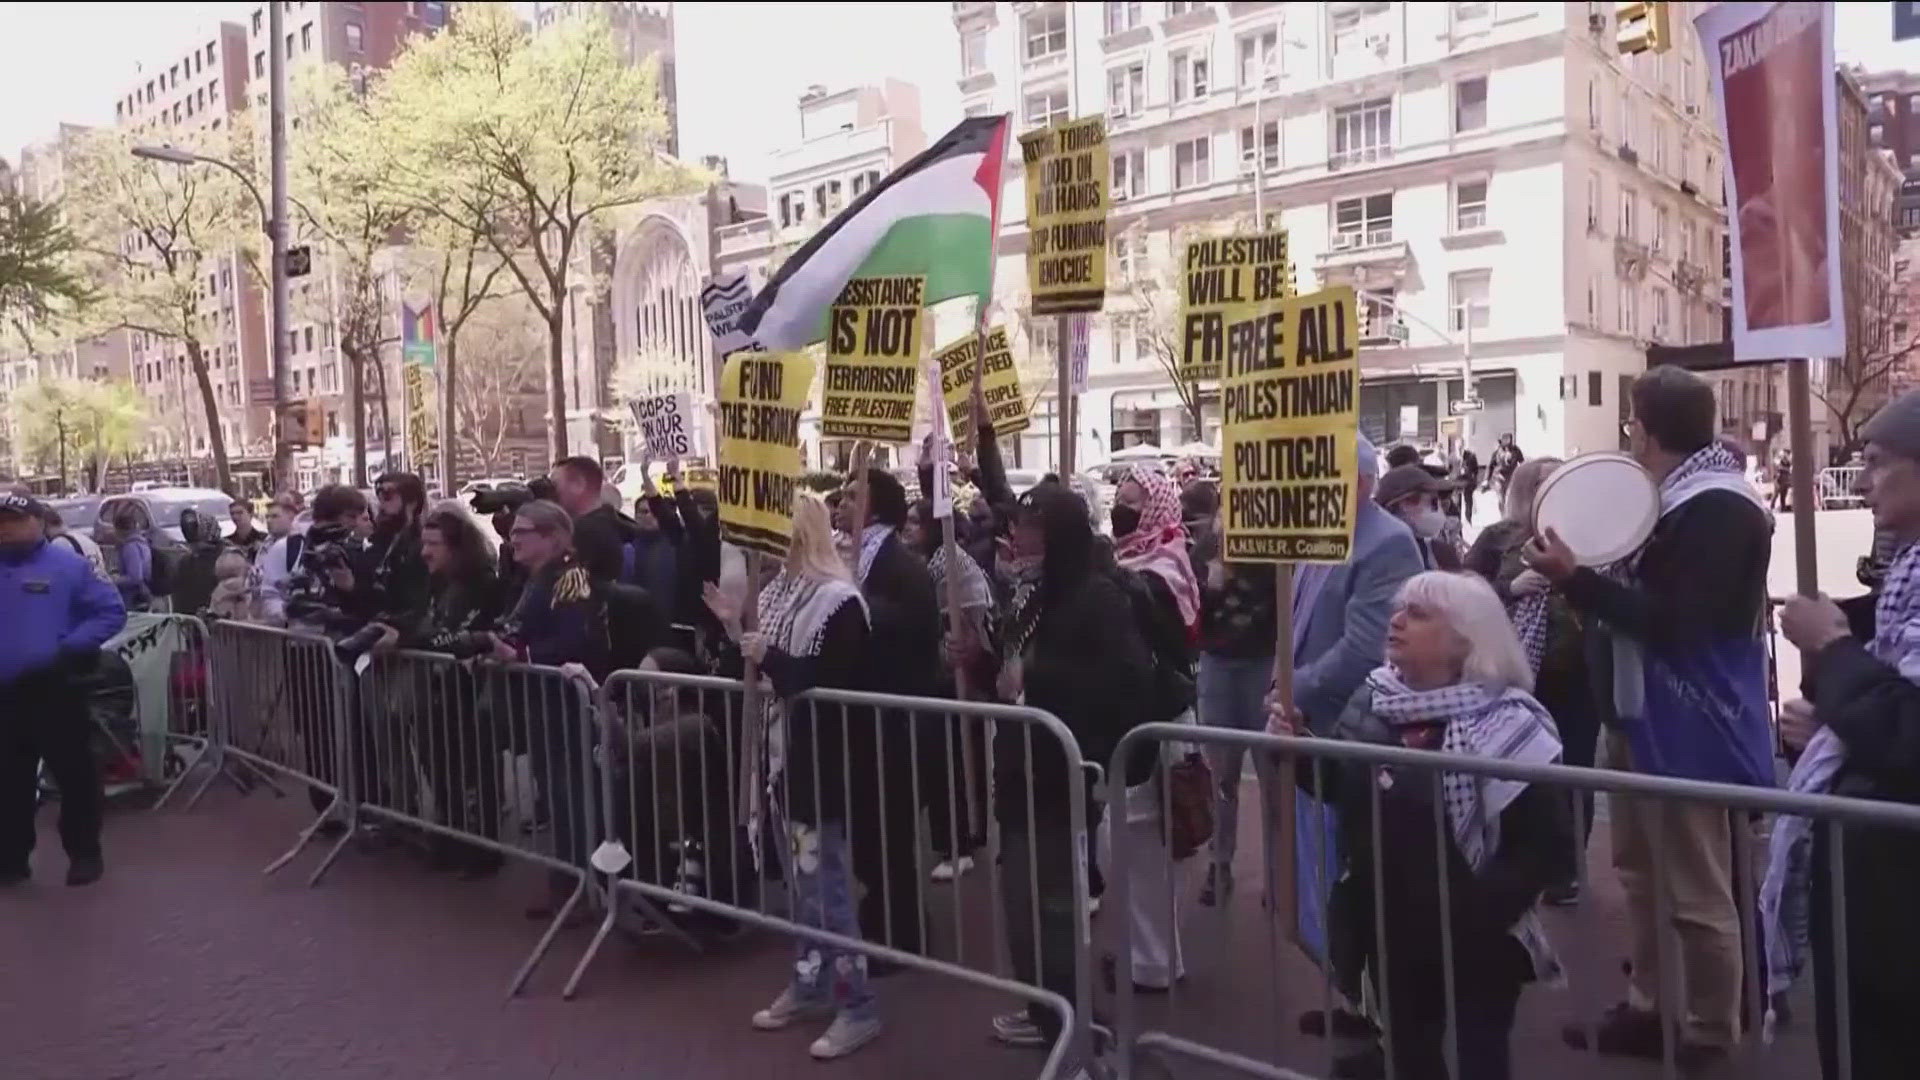 Pro-Palestinian protestors are back out on college campuses across the country today.